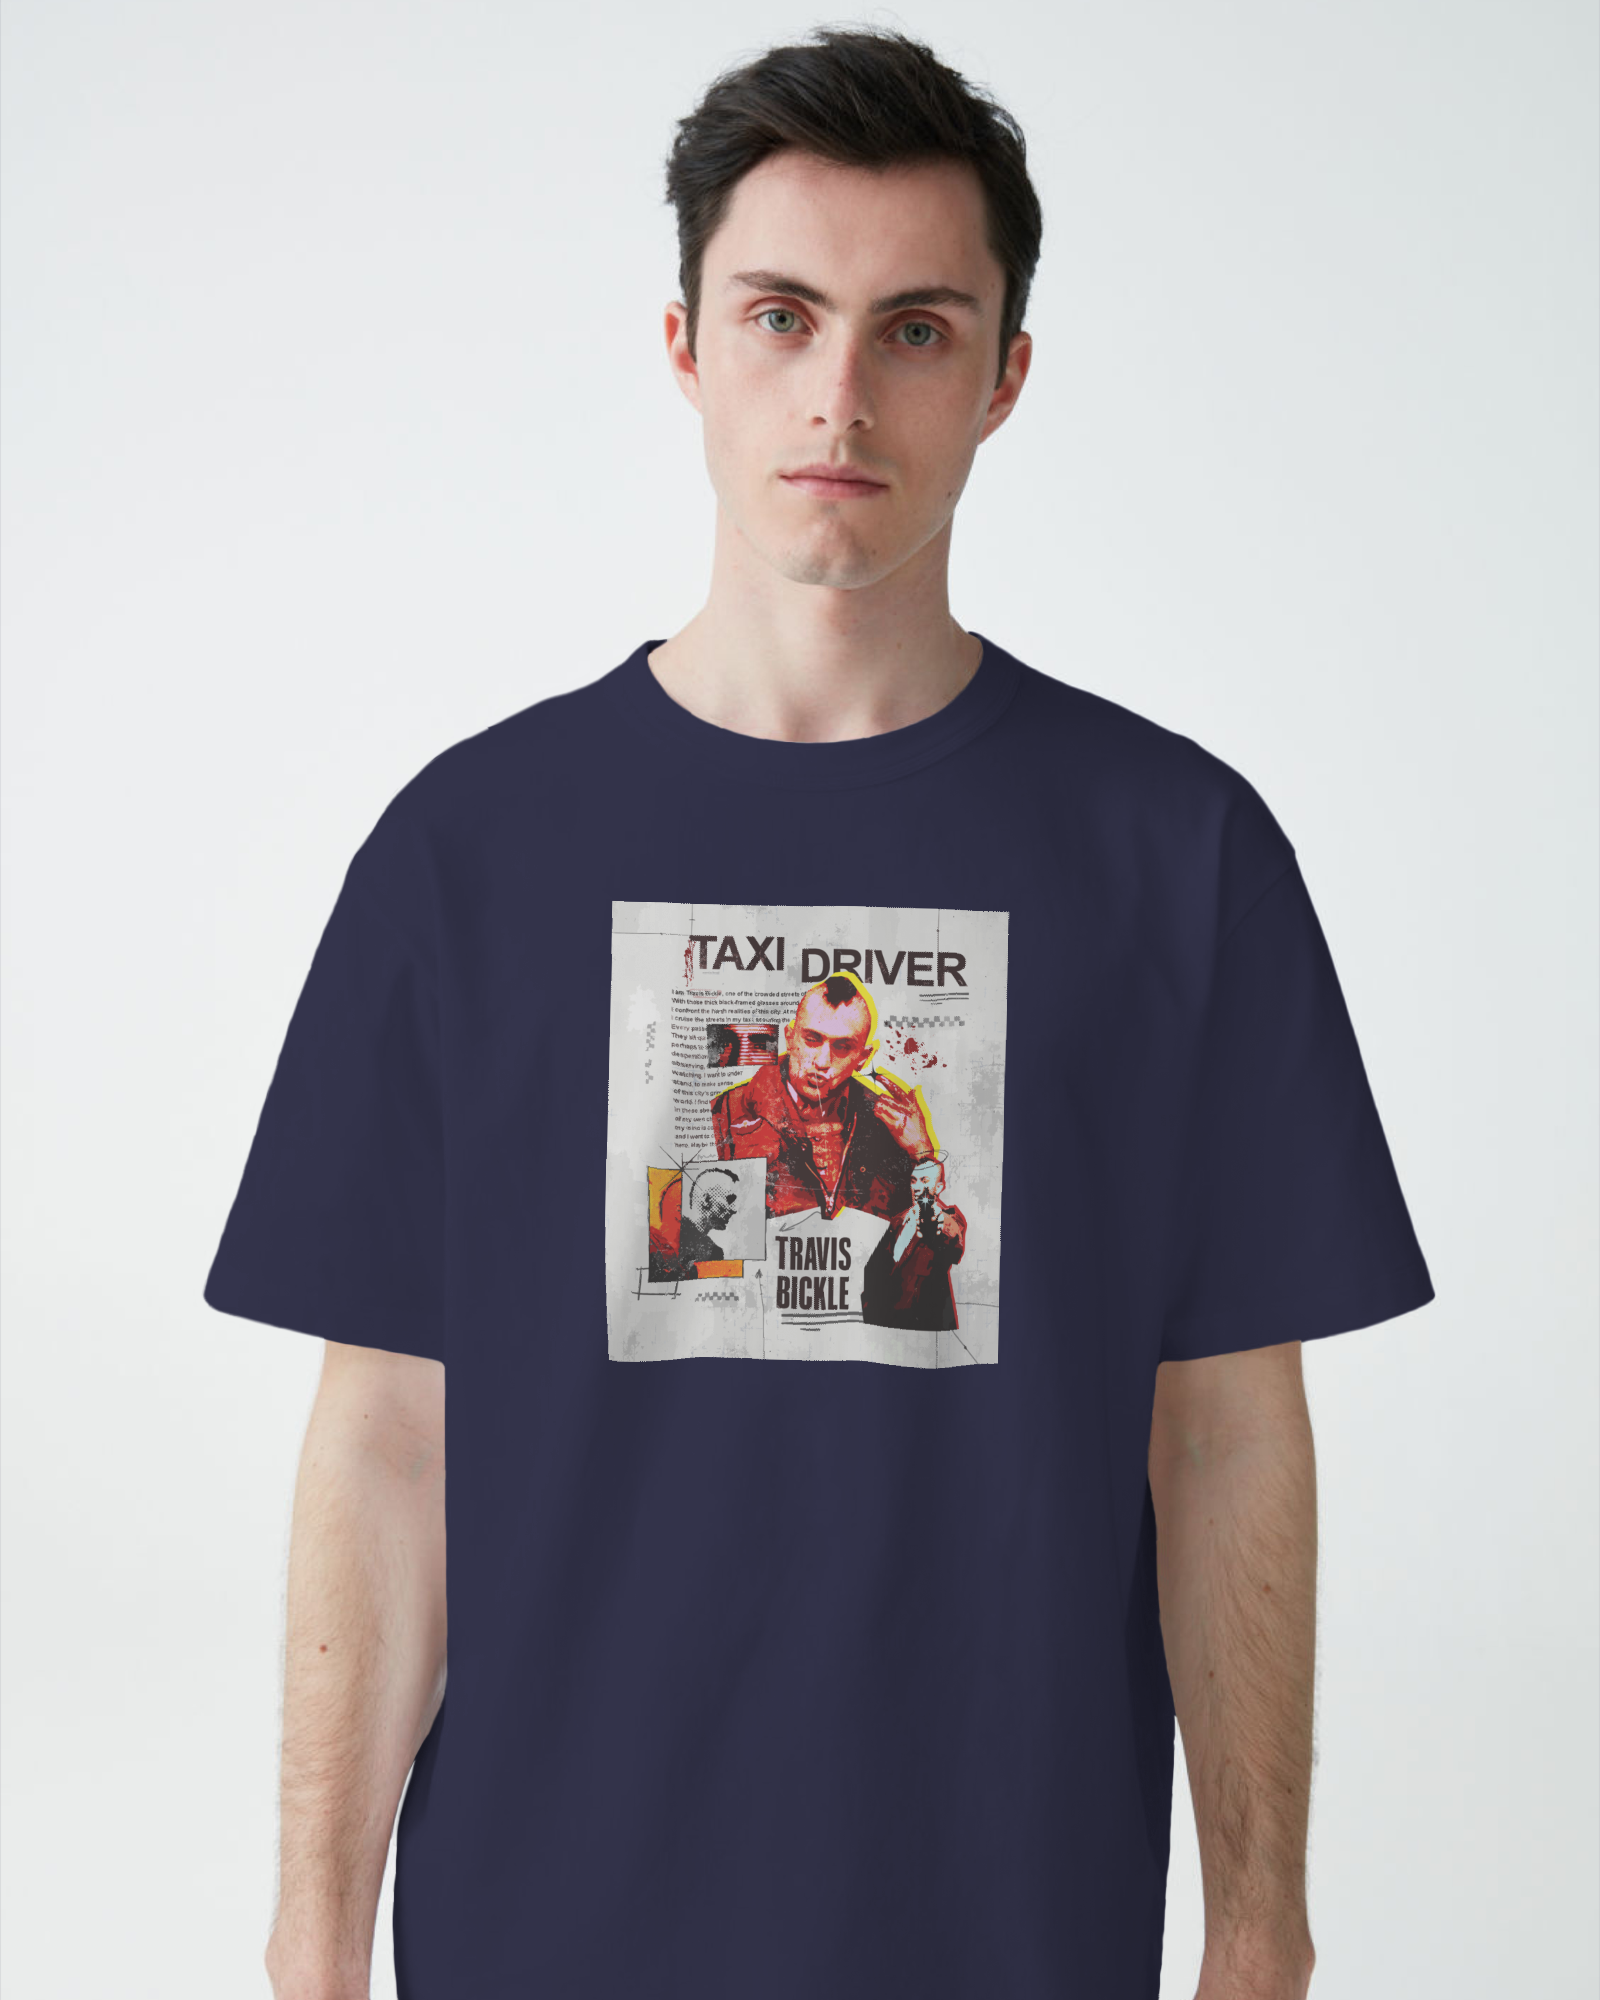 TAXI DRIVER TRAVIS OVERSIZED T SHIRT BLUE